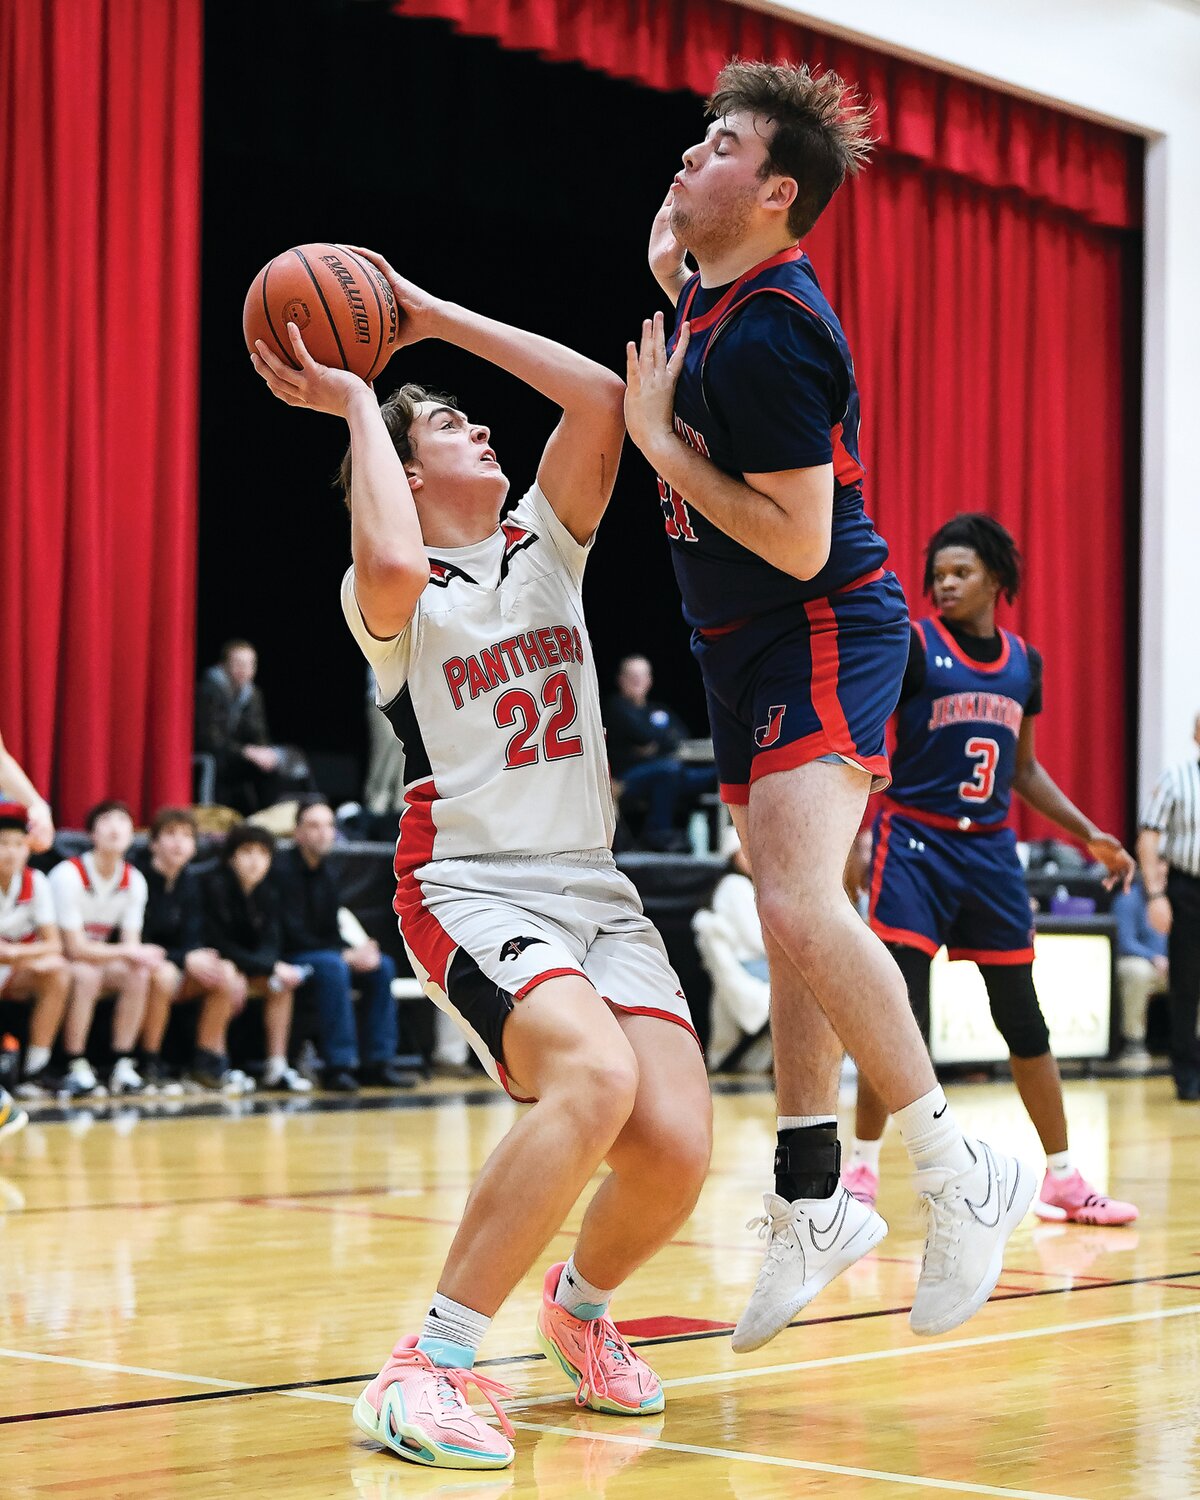 Plumstead Christian’s Tobias Link fakes out Jenkintown’s Tommy Walsh while getting off a shot in the second half.